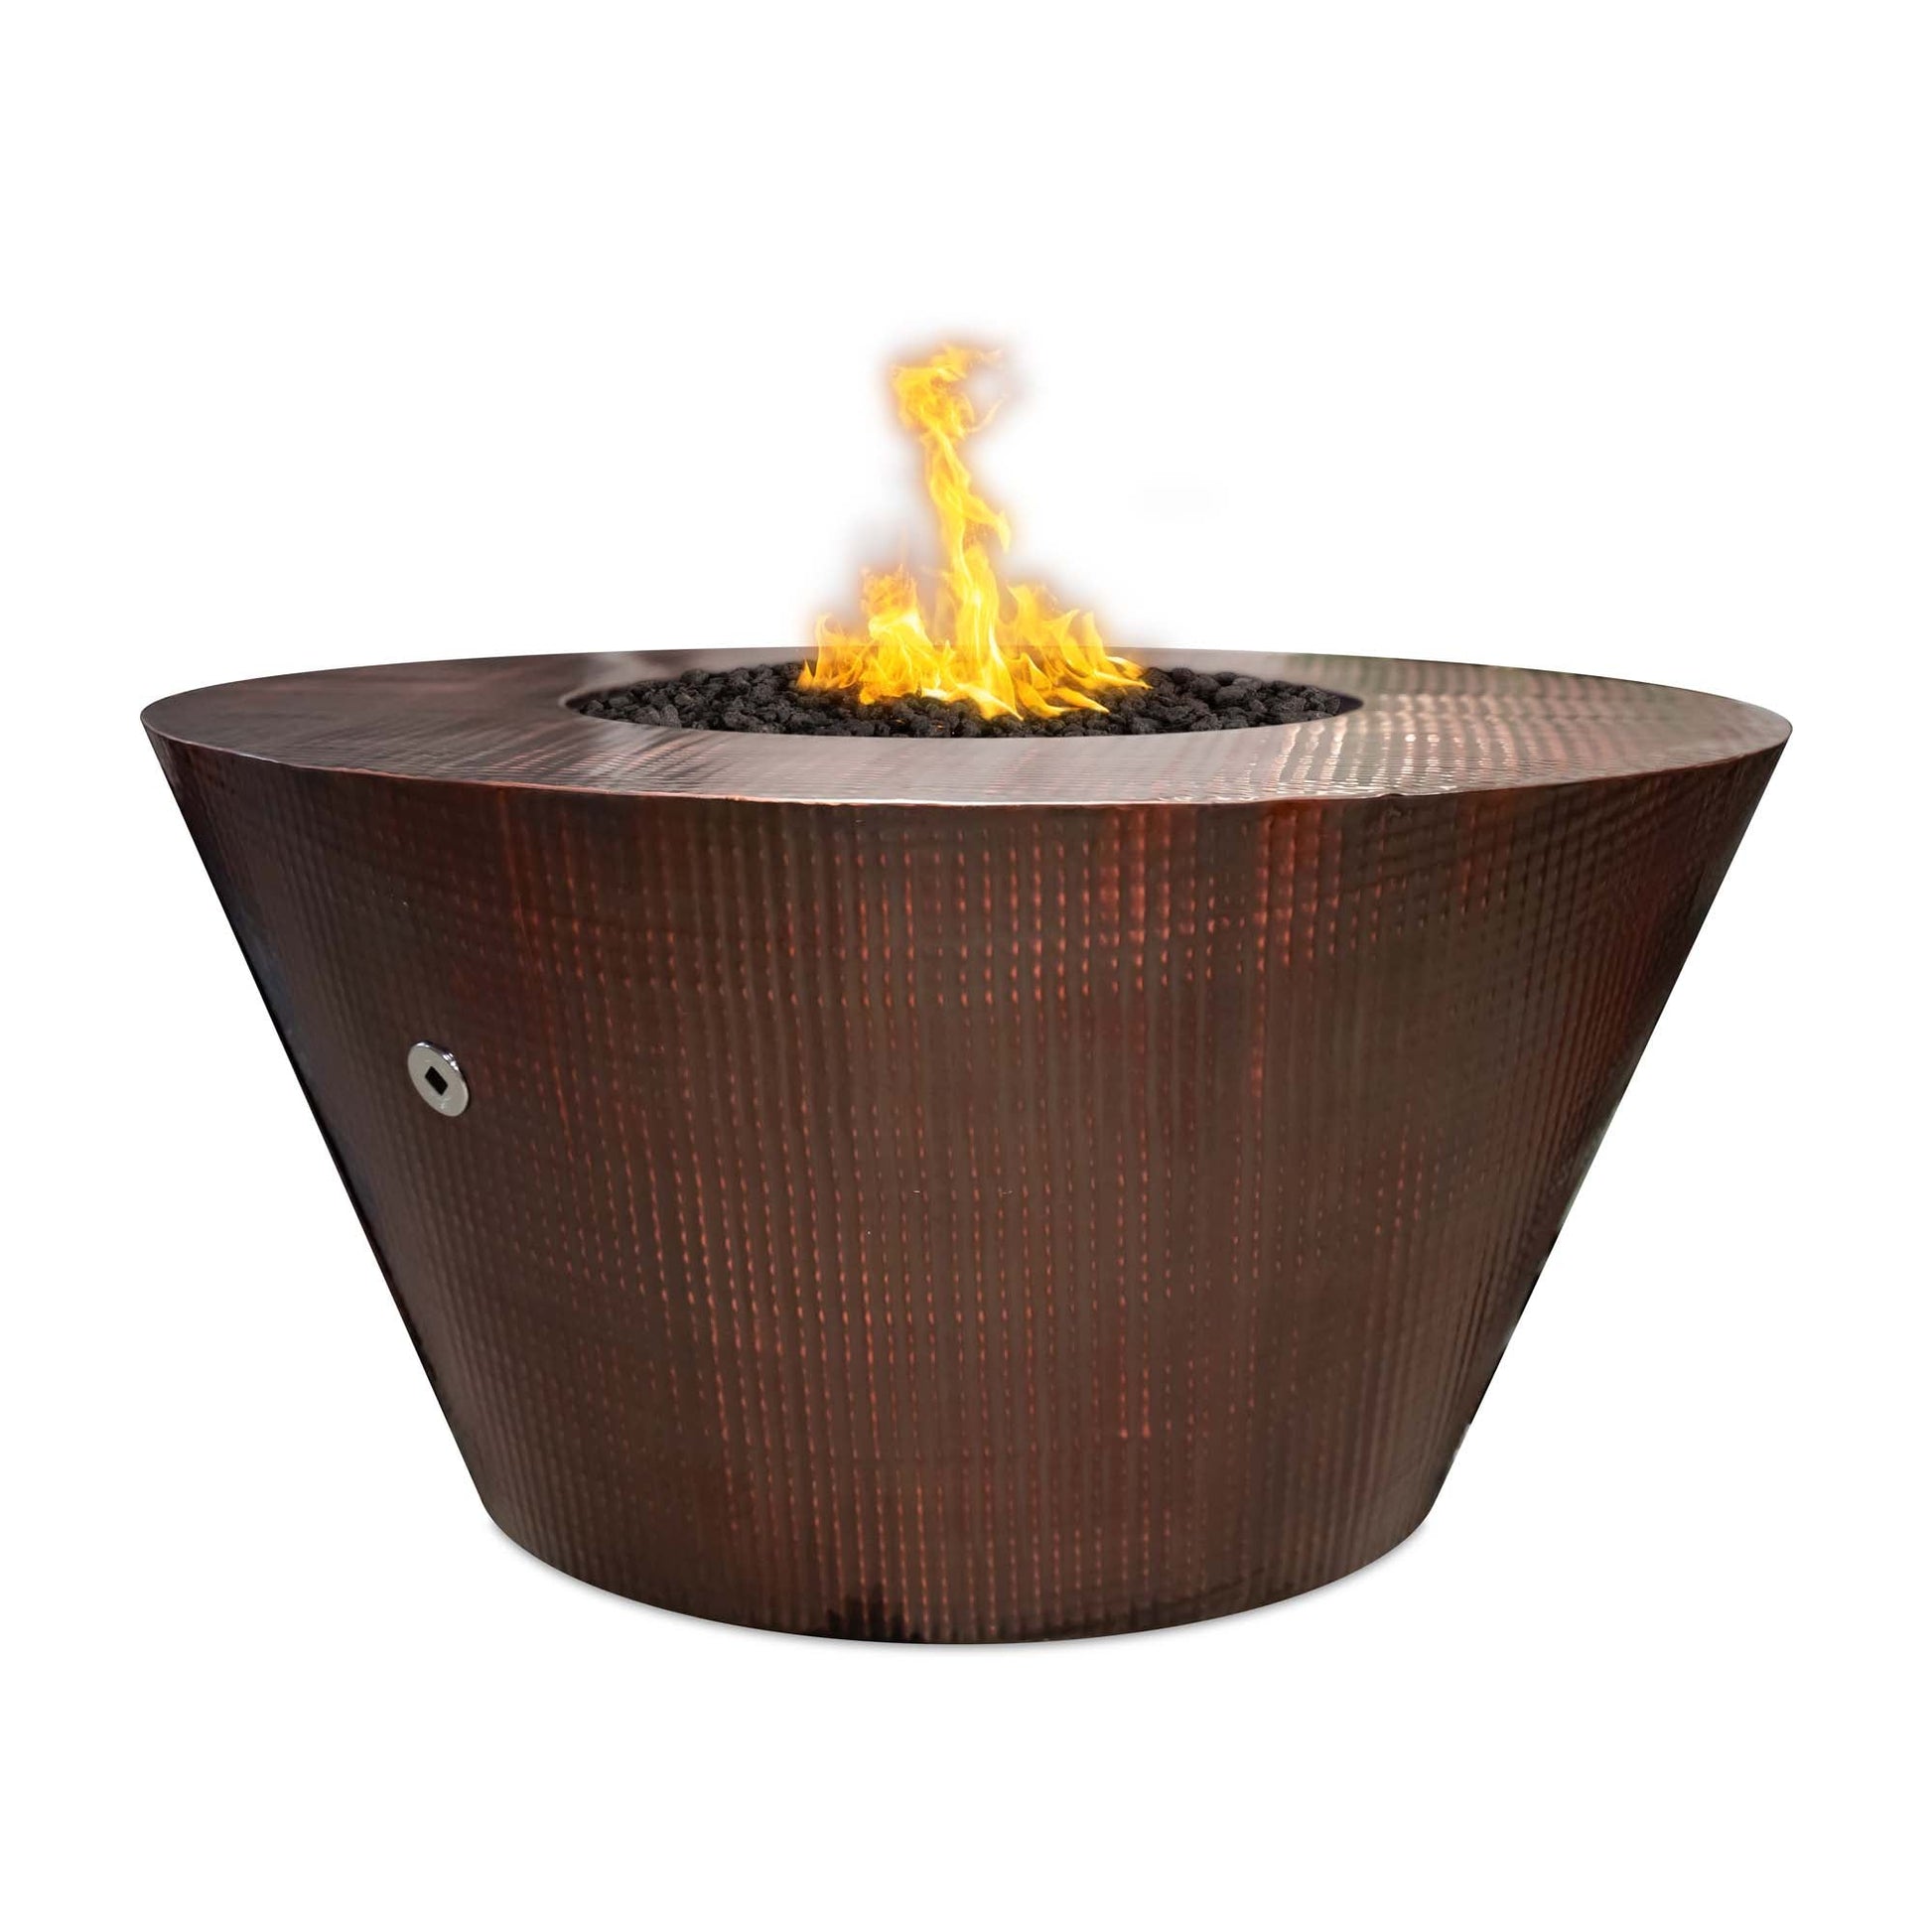 The Outdoor Plus Round Martillo 48" Stainless Steel Liquid Propane Fire Pit with Match Lit with Flame Sense Ignition